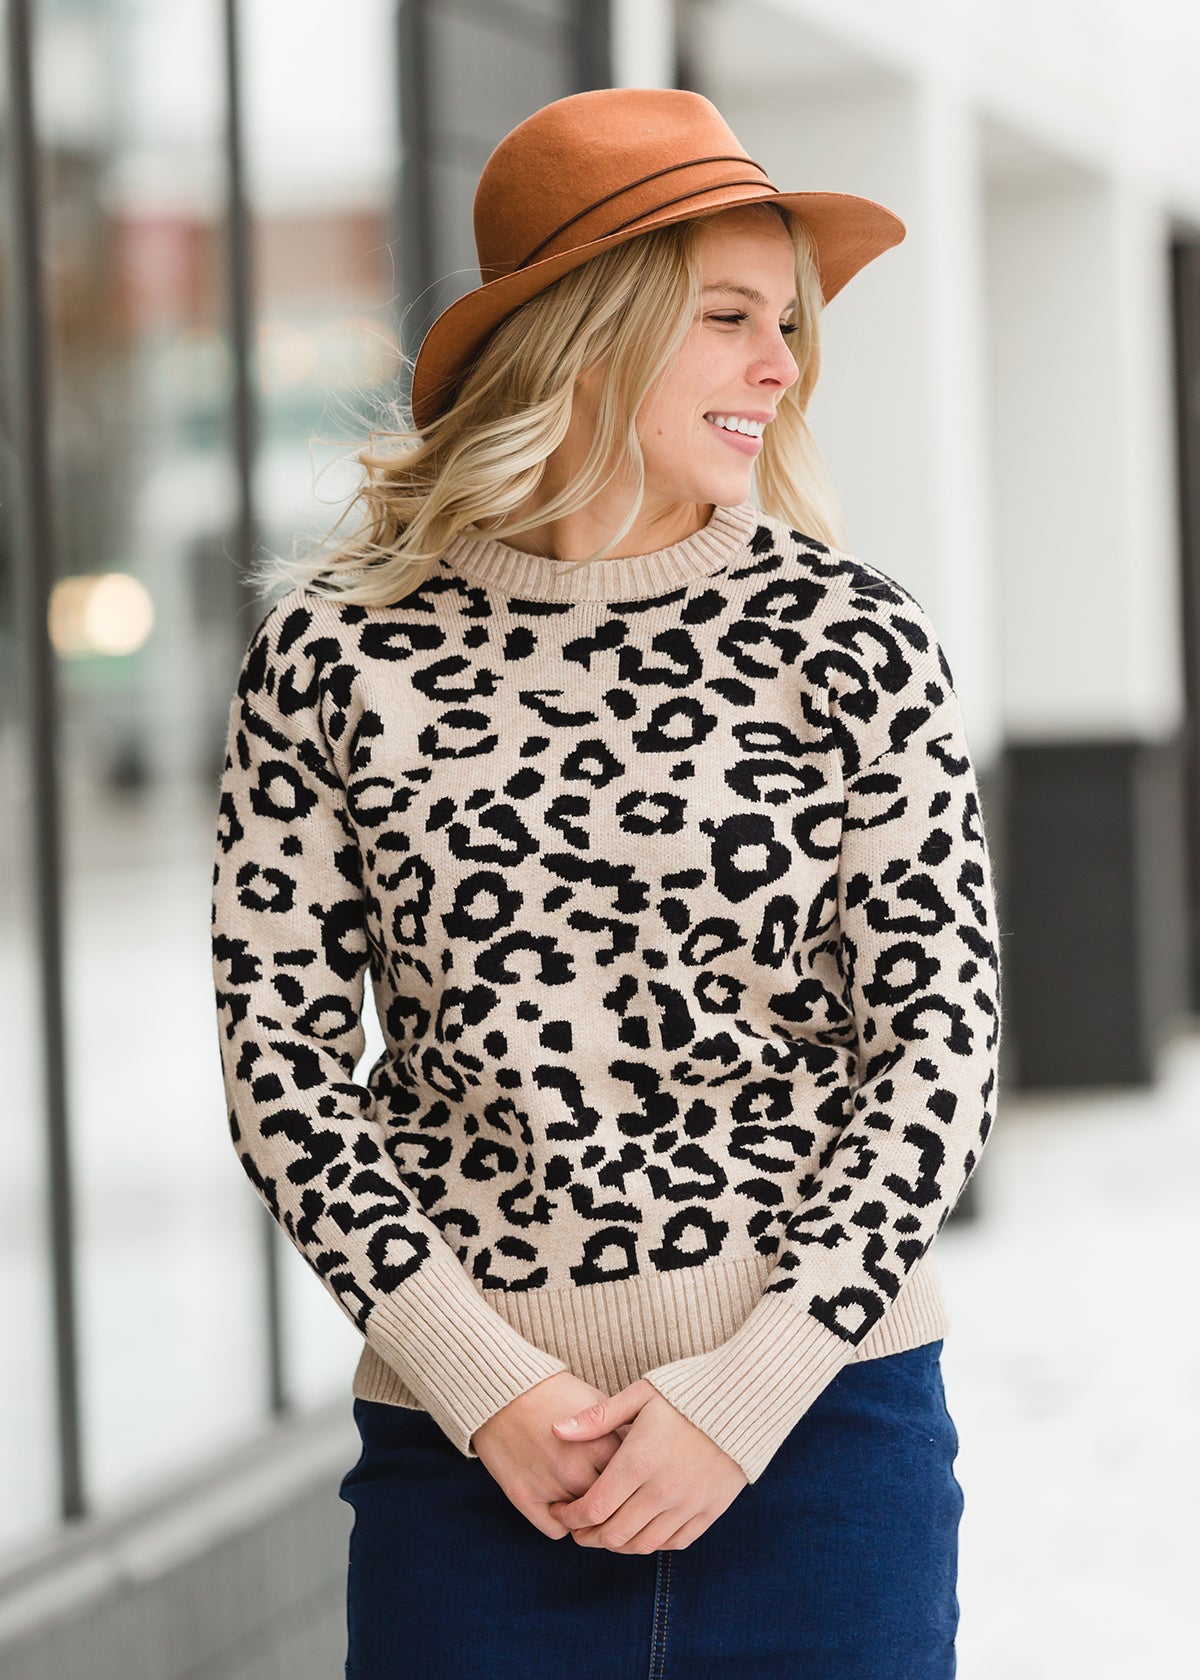 Ribbed Leopard Print Sweater - FINAL SALE Tops